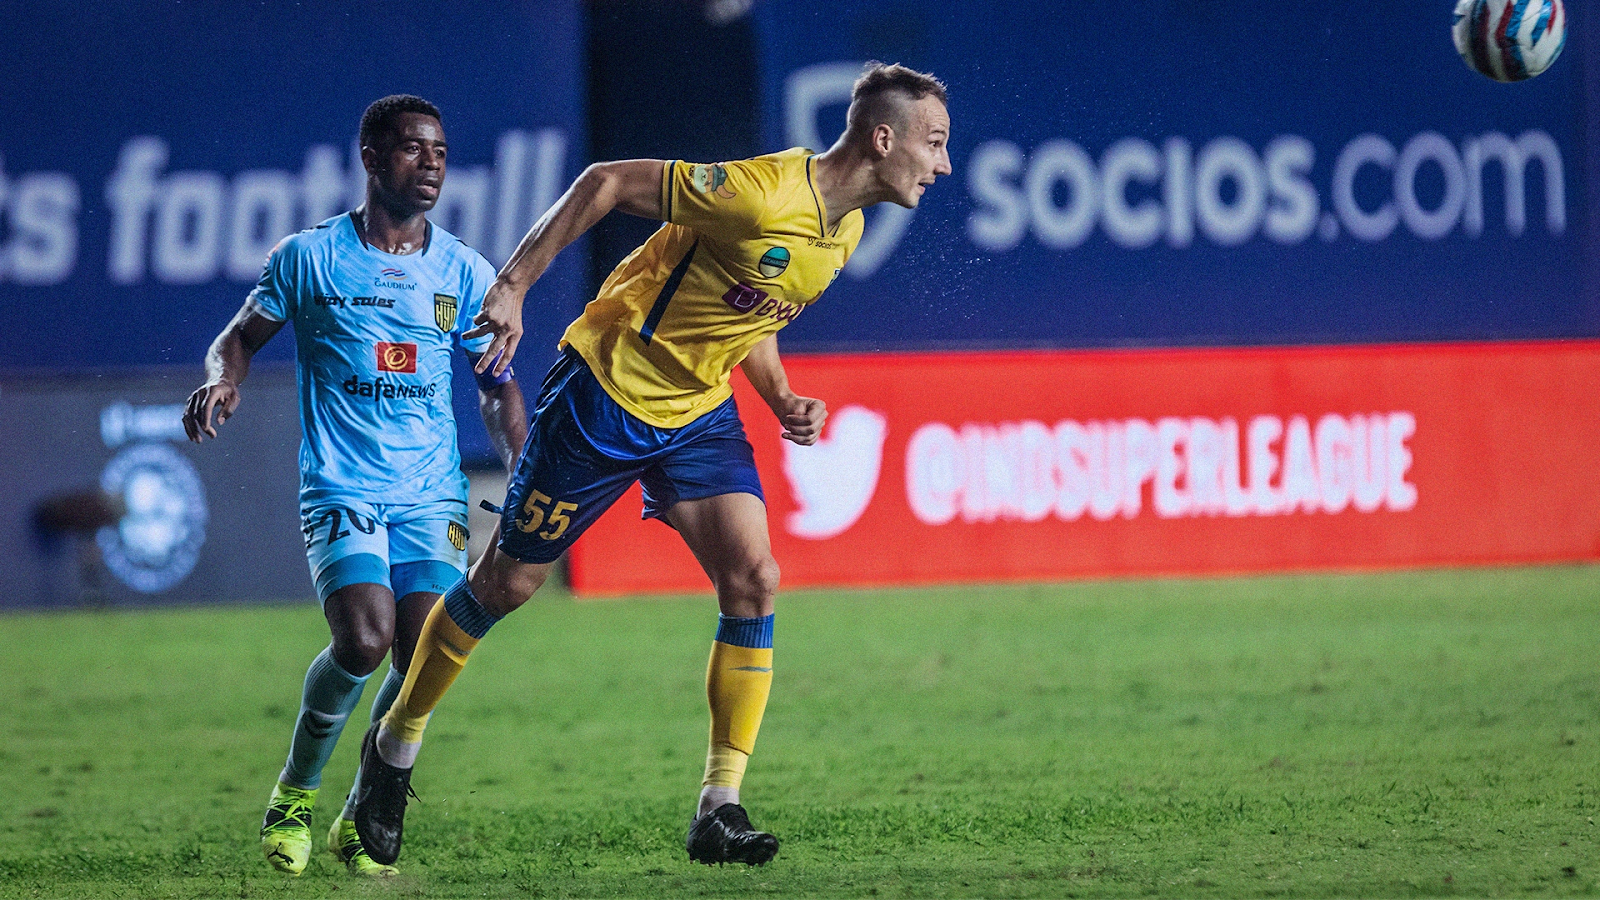 Marko Leskovic was solid as a rock at the back for Kerala Blasters